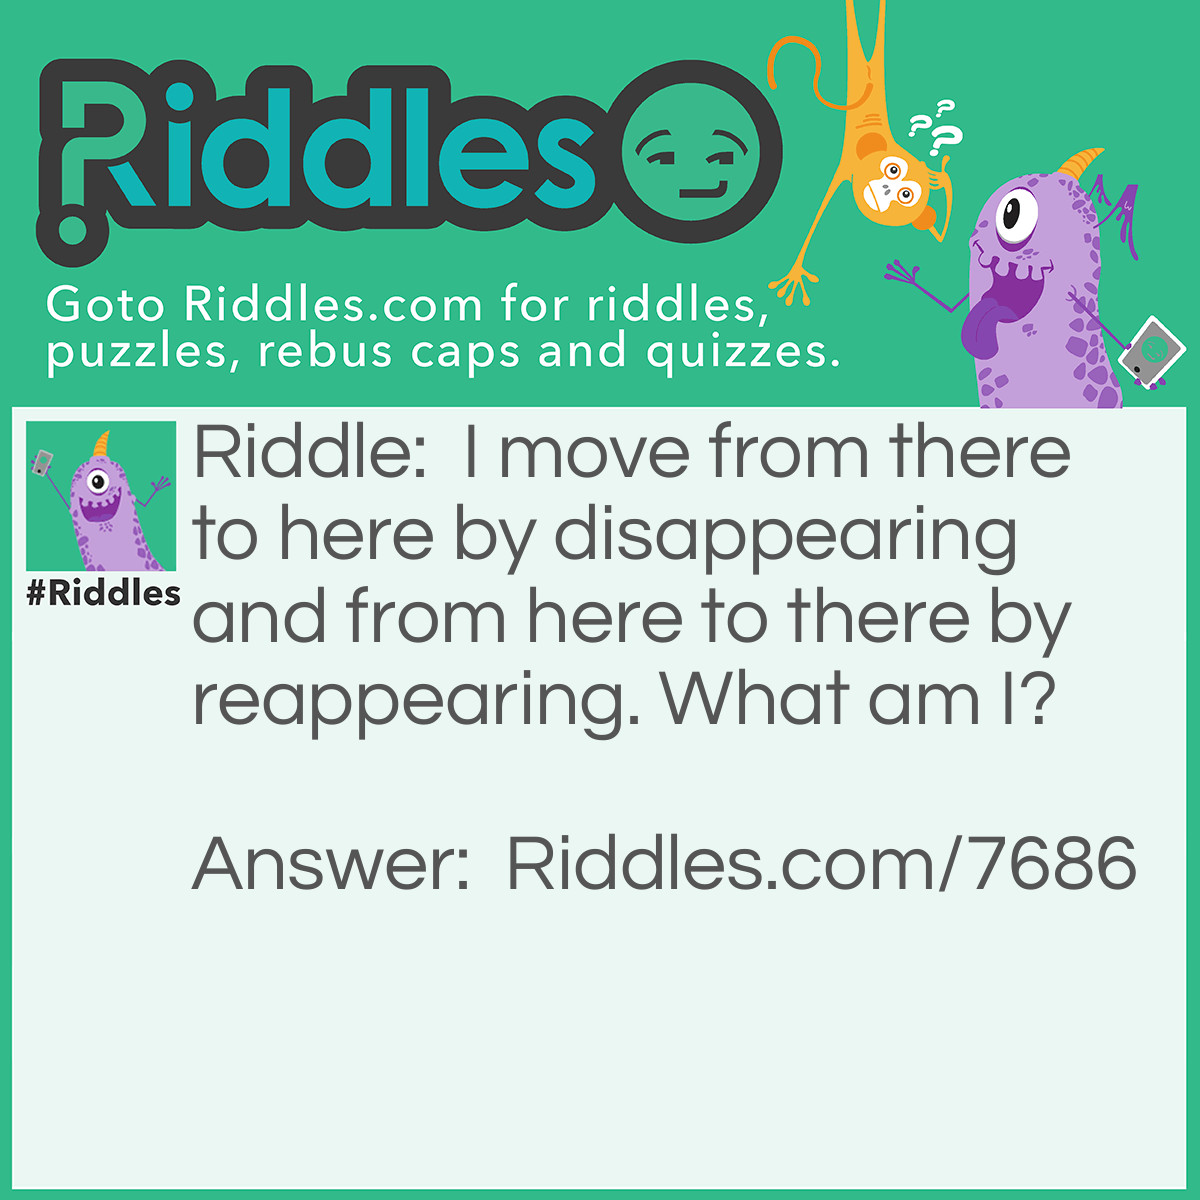 Riddle: I move from there to here by disappearing and from here to there by reappearing. What am I? Answer: The letter T.